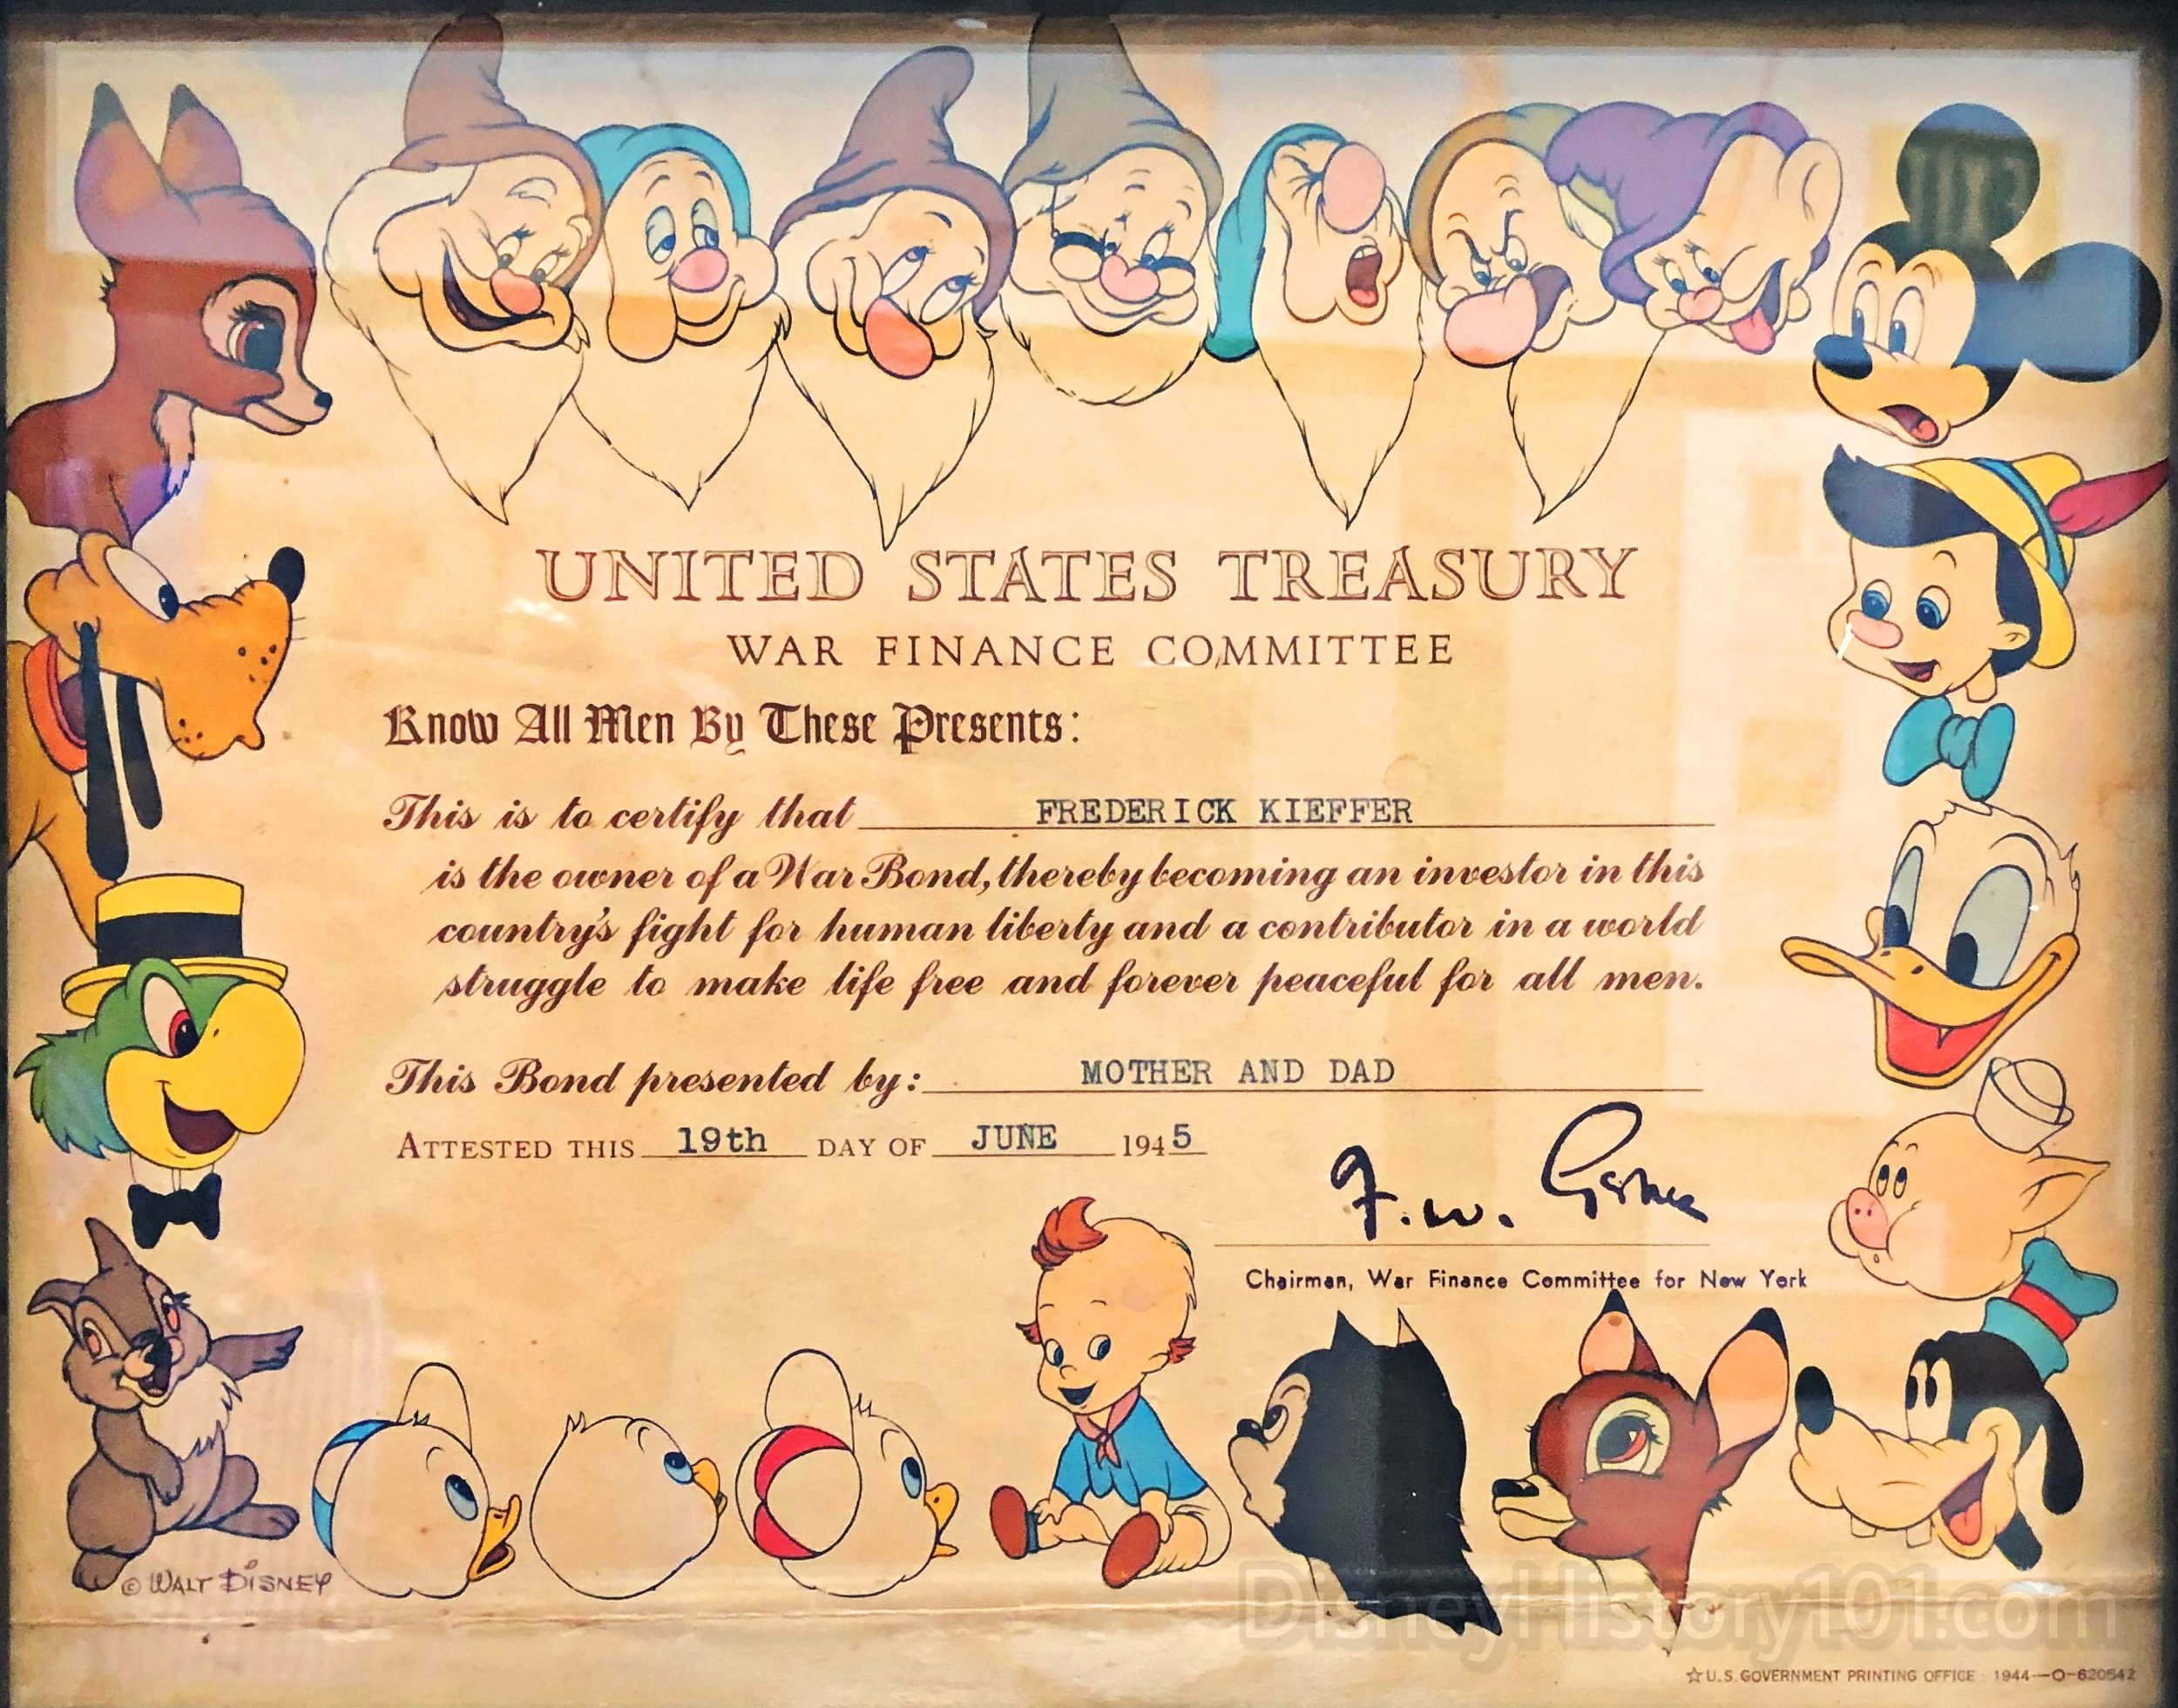  This limited debt security issued by the United States government is dated by it’s many Walt Disney Studios characters featured - including Baby Weems (from the wartime release The Reluctant Dragon, 1941), Bambi (from the 1942 film of the same name)